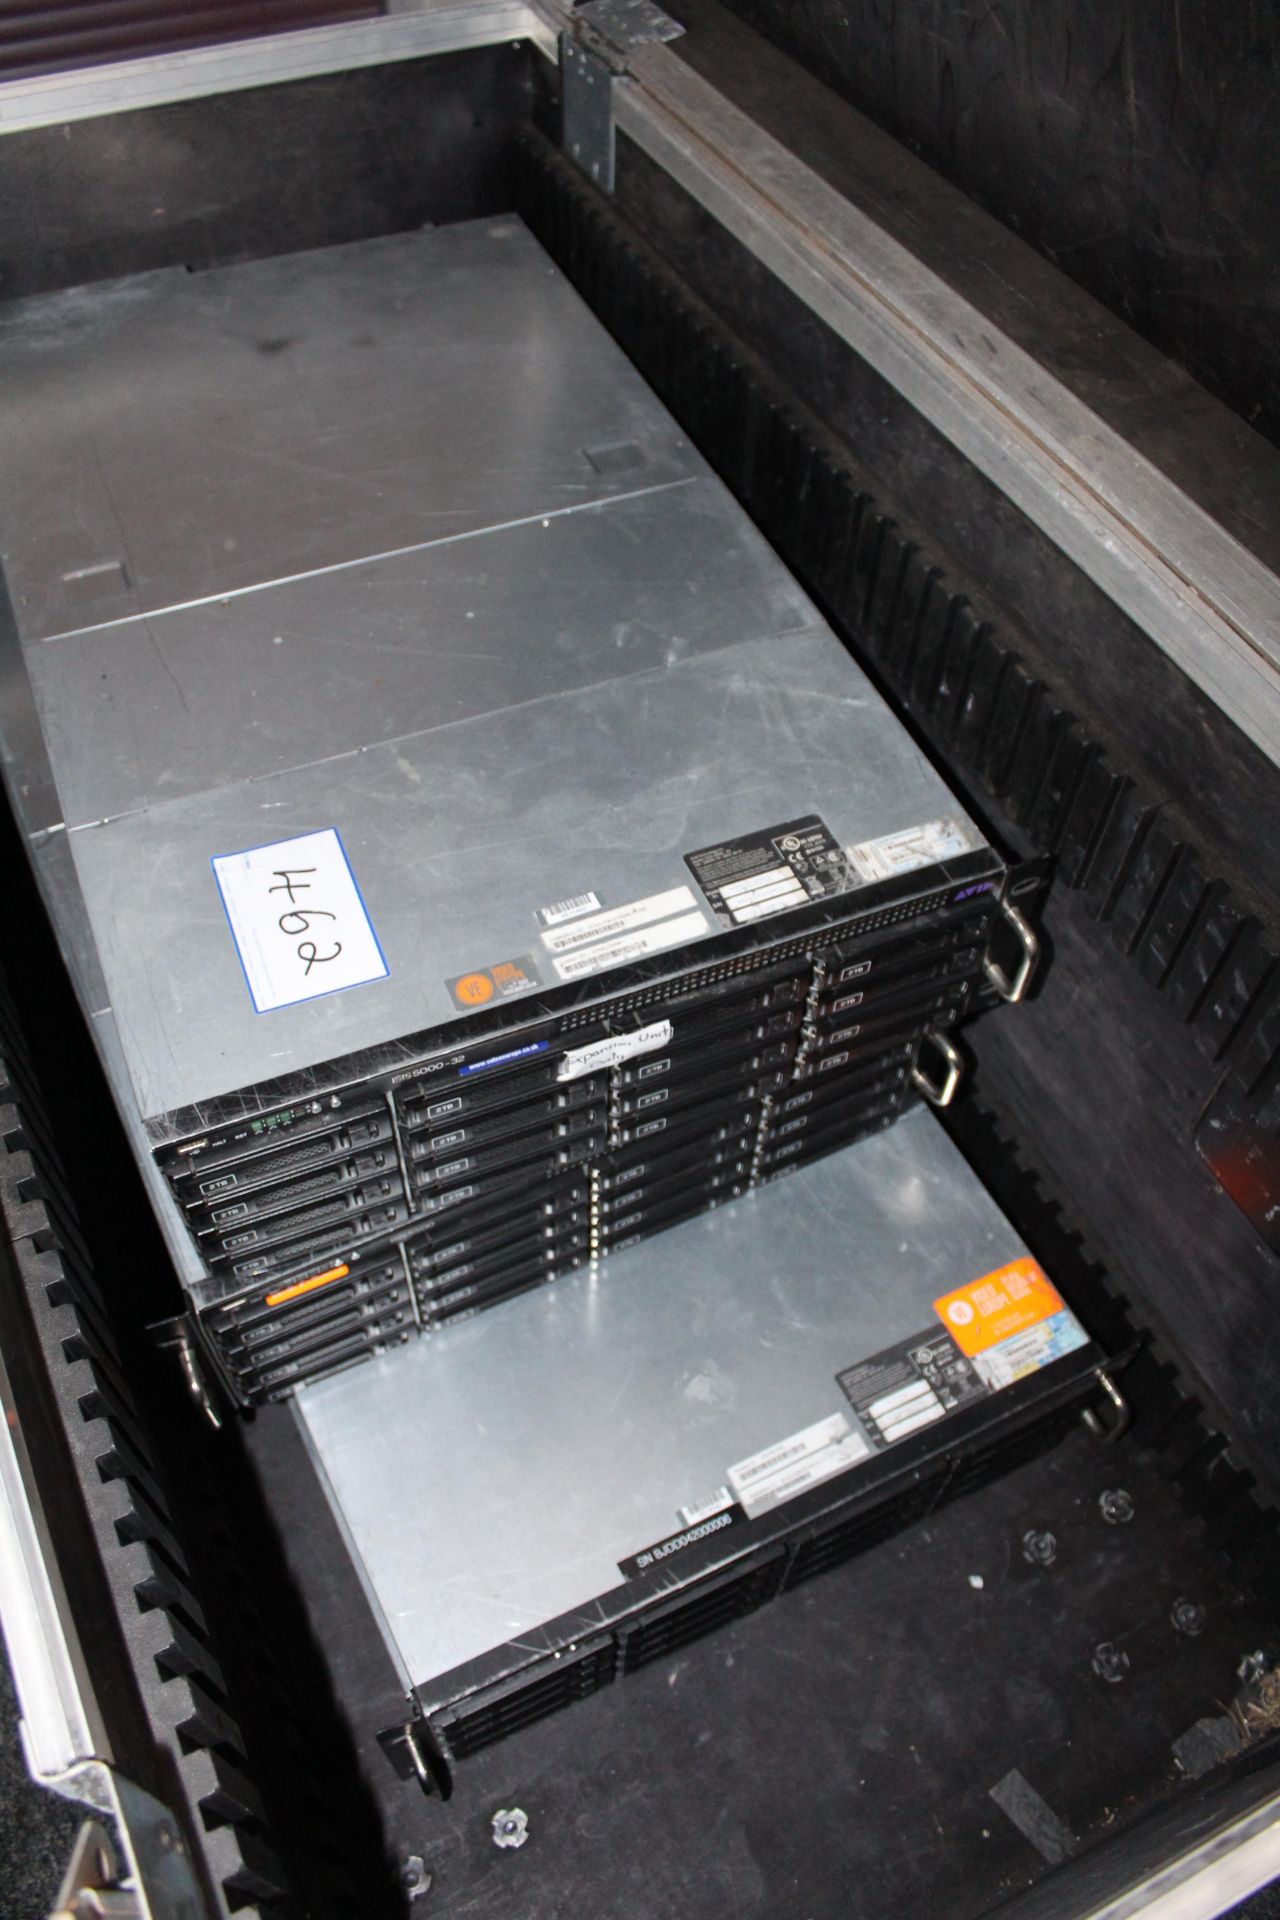 3 Avid Isis 5000. Shared Media Storage Systems